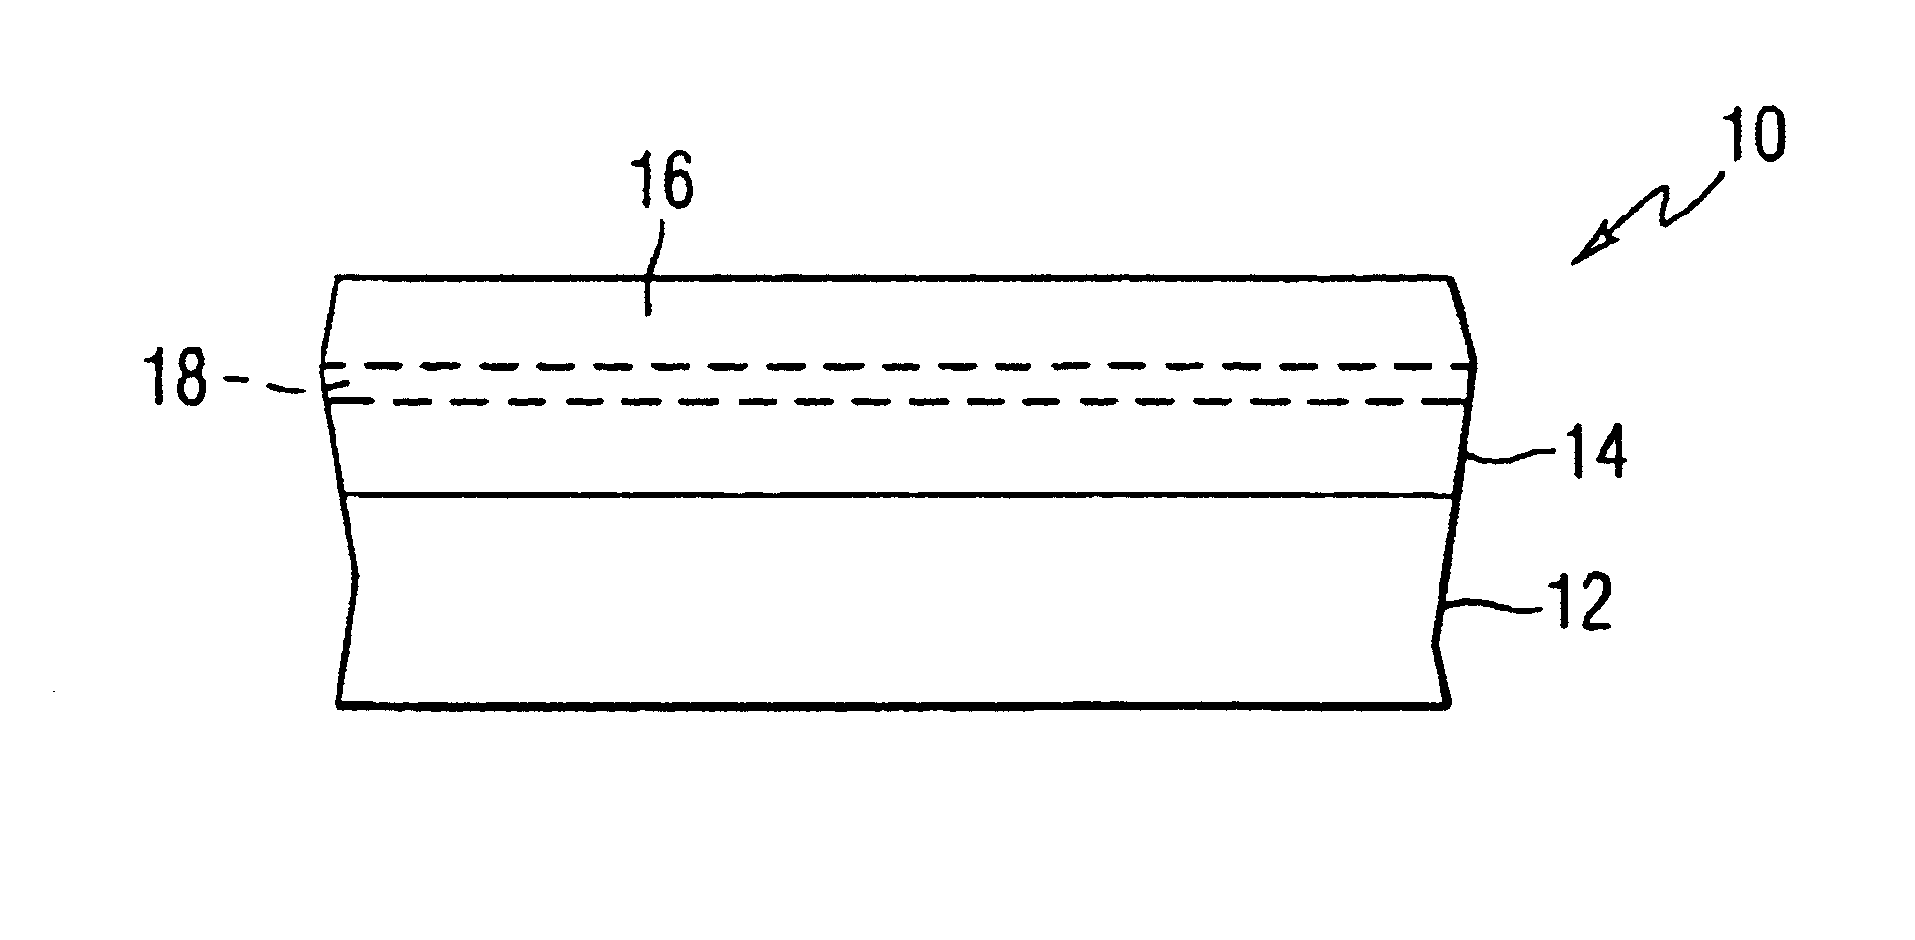 Light-transmitting and/or coated article with removable protective coating and methods of making the same